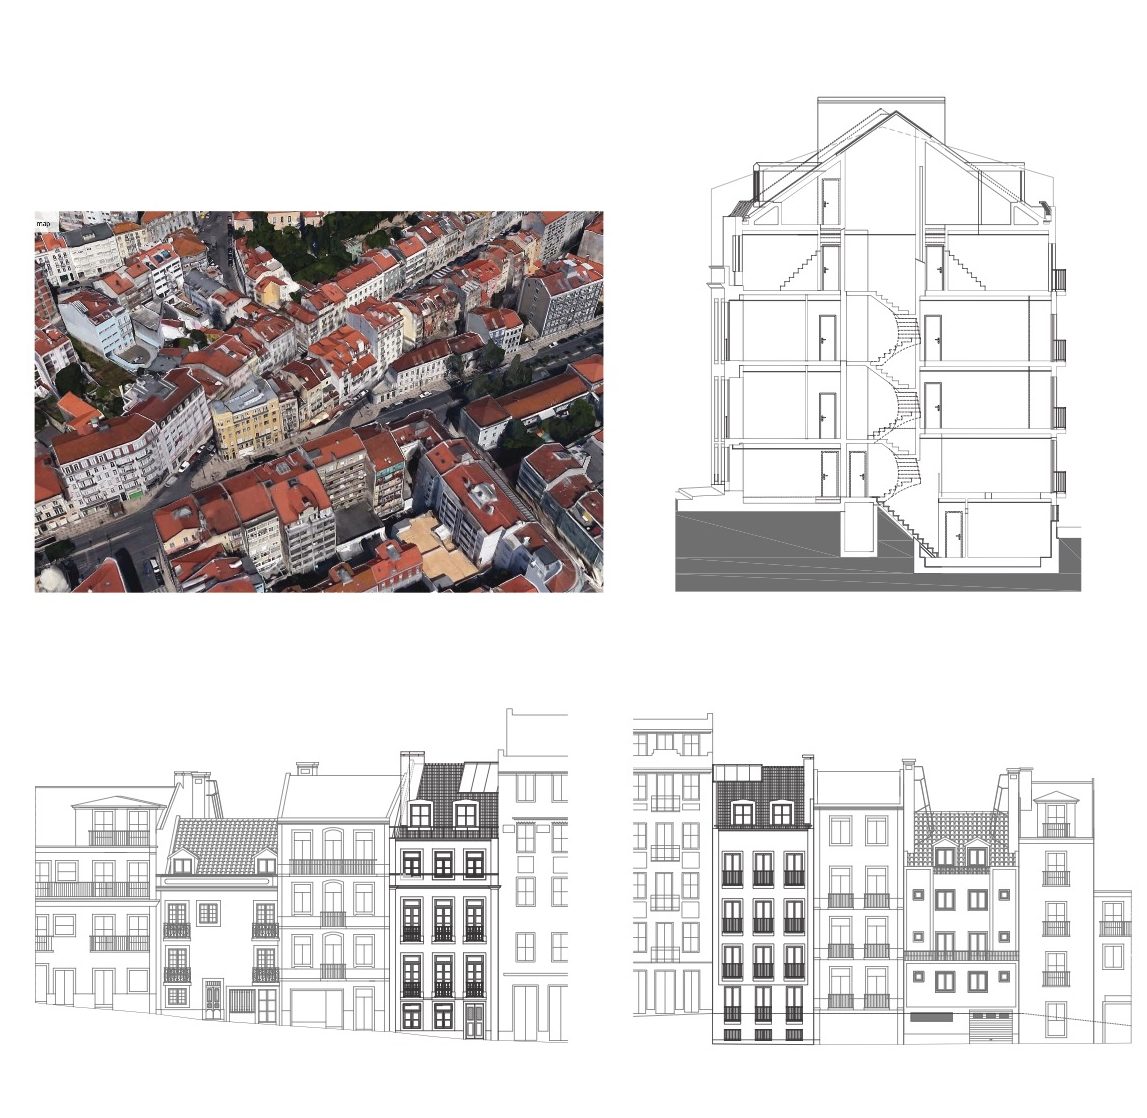 Rua dos Anjos Building no. 24 Lisbon (expansion and remodelling) - collective housing, 6 floors of 1 and 2 bedroom apartments - 597 sq m of gross building area.